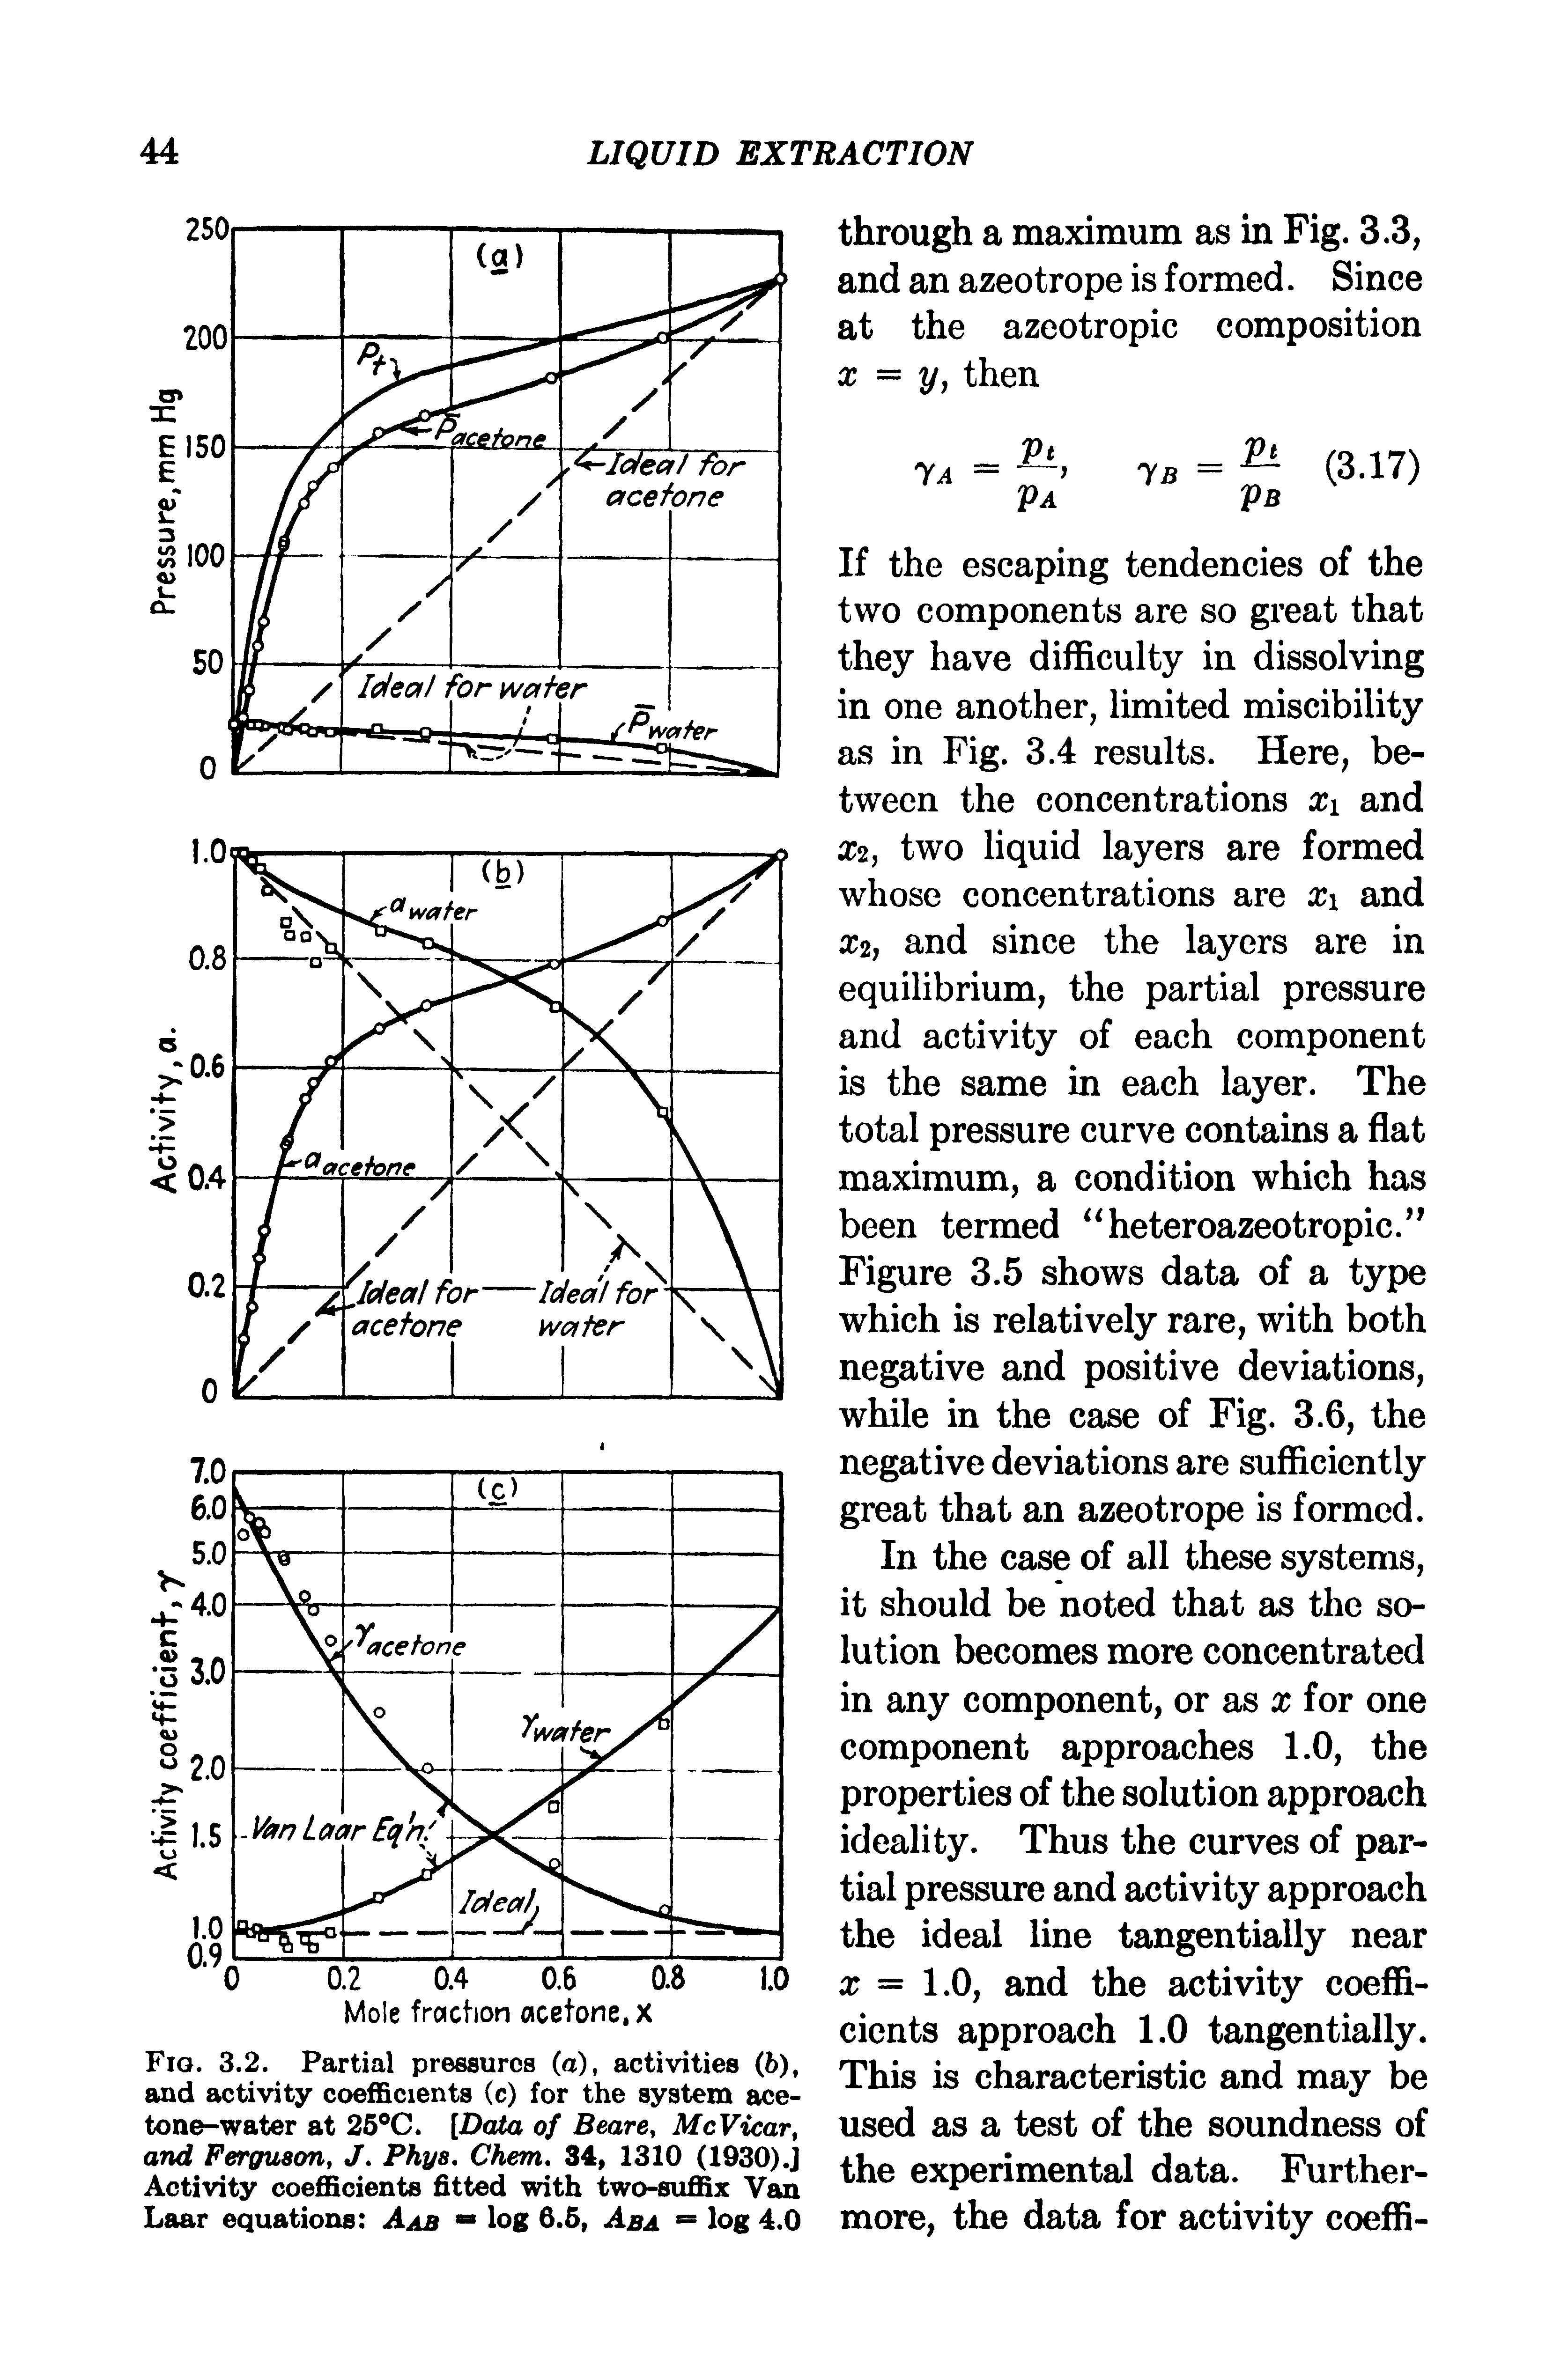 Fig. 3.2. Partial pressures (a), activities (6), and activity coefficients (c) for the system acetone-water at 26 C. [Data of BearOy McVicavy and Fergitaon, J. Phya. Chem, 34, 1310 (1930).J Activity coefficients fitted with two-suffix Van Laar equations Aab log 6.5, Aba log 4.0...